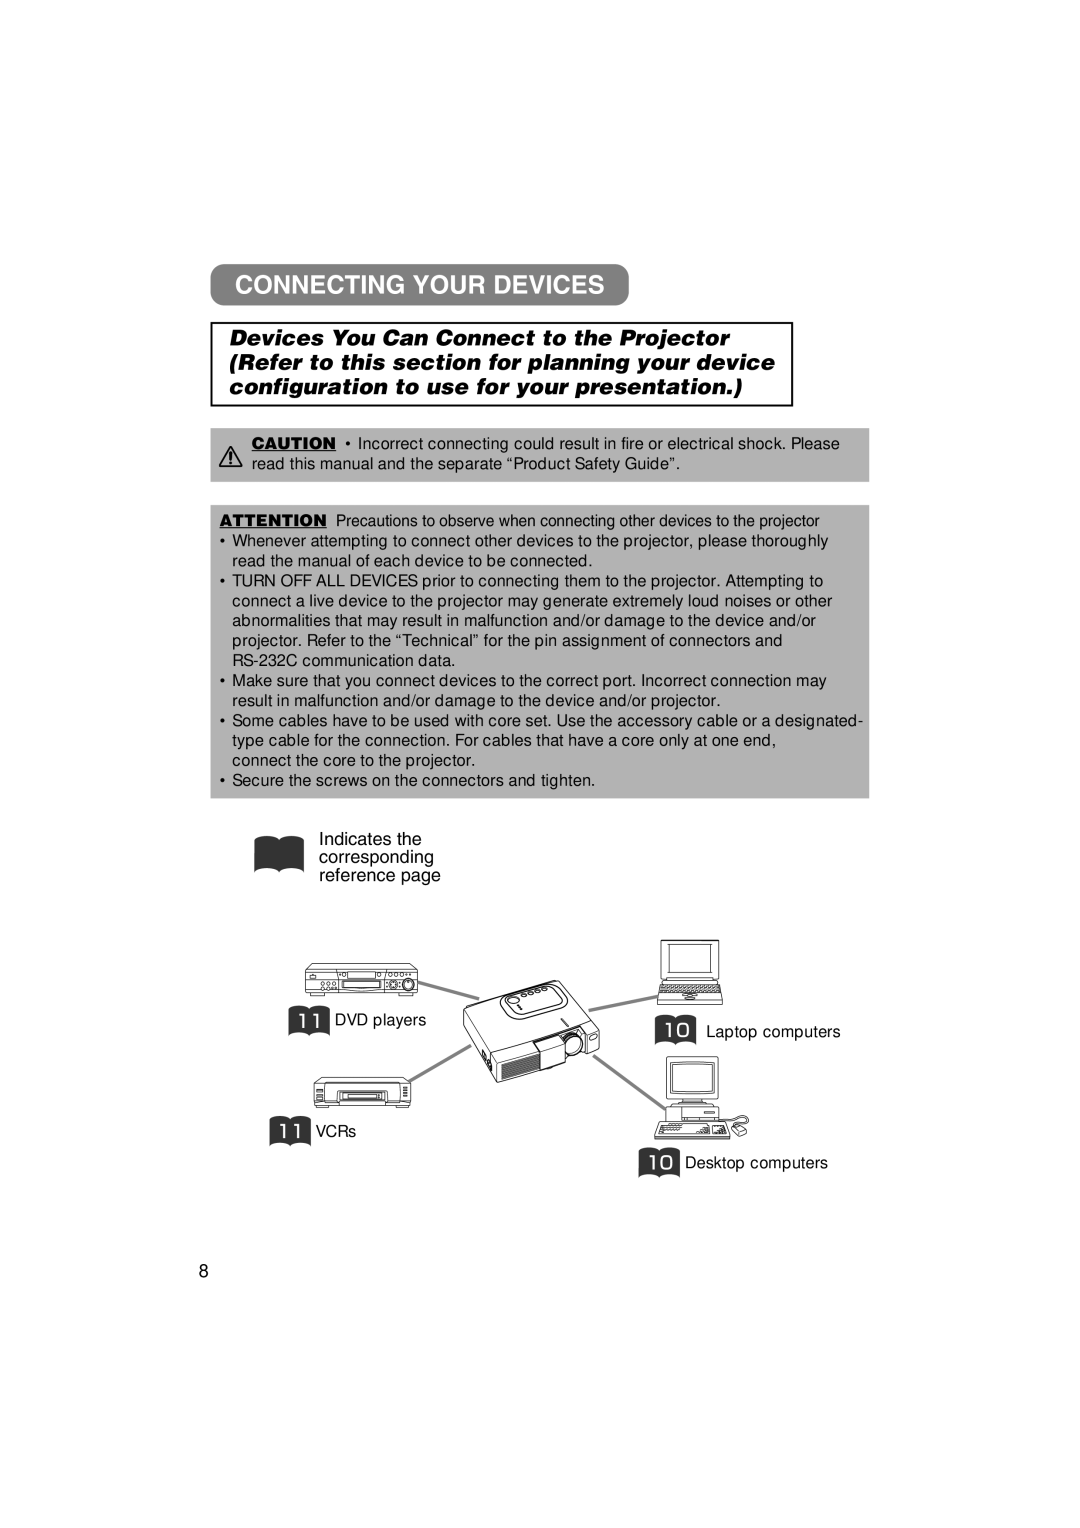 3M MP7640i/MP7740i manual Connecting Your Devices, Indicates the corresponding reference page 